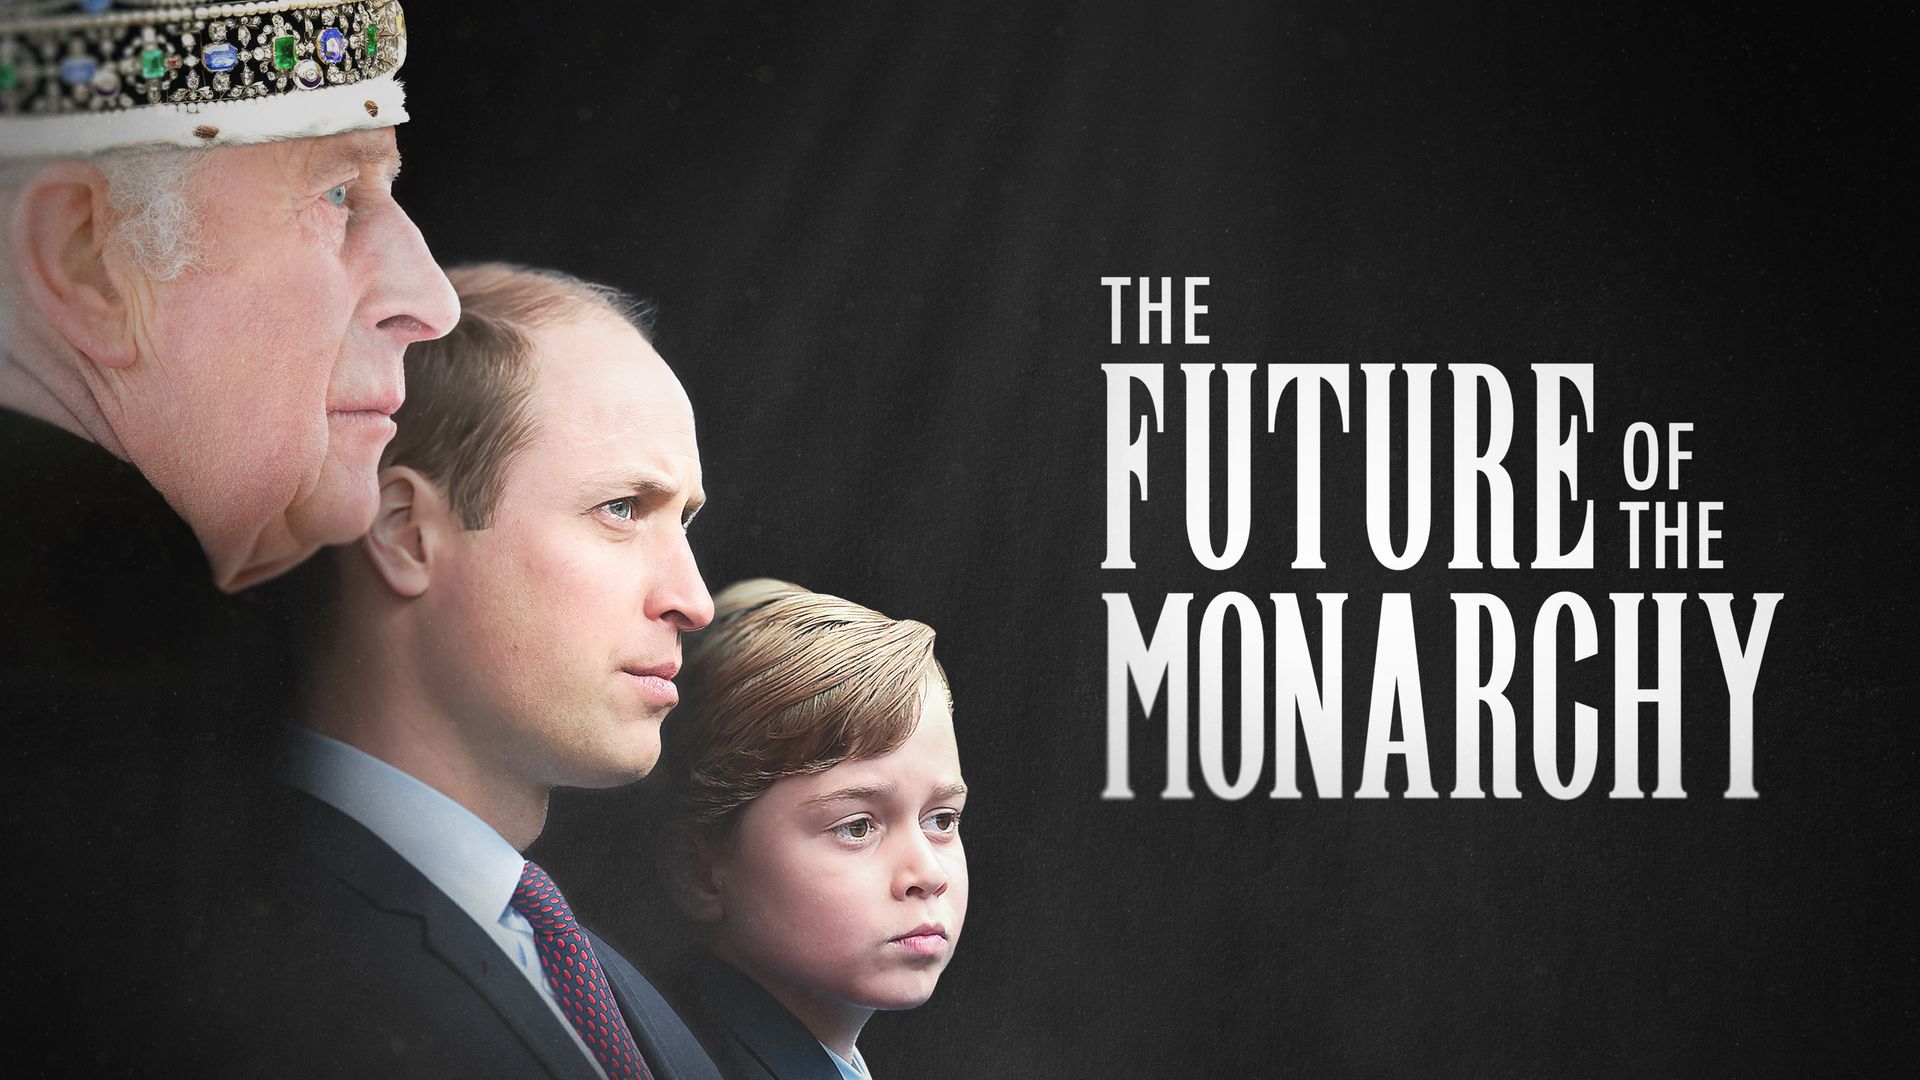 The Future of the Monarchy